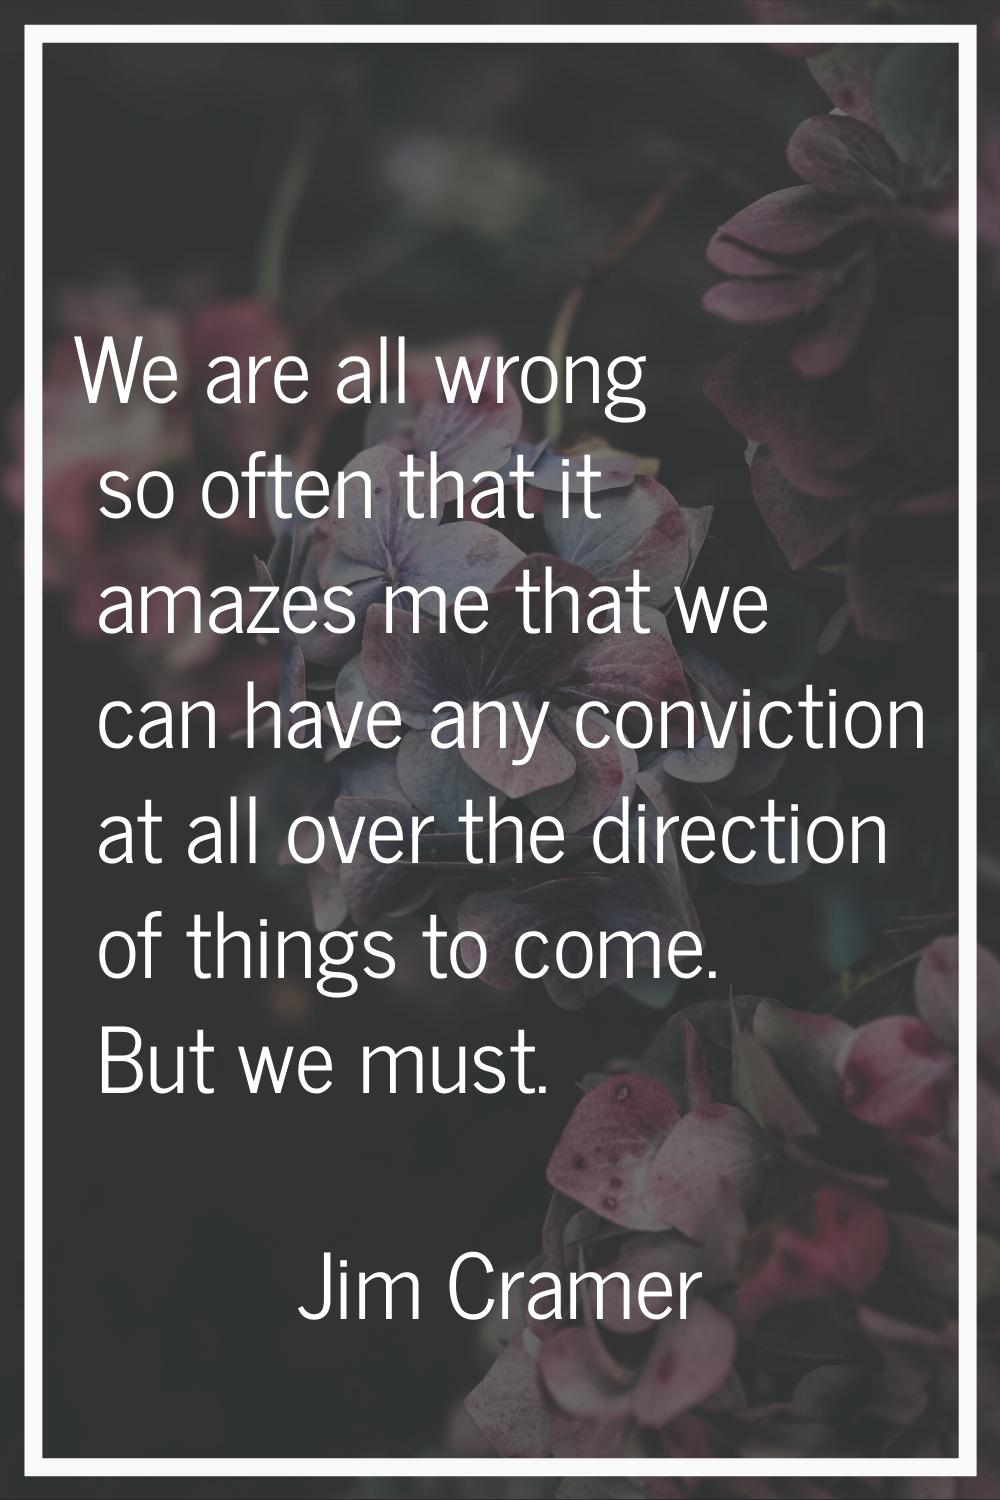 We are all wrong so often that it amazes me that we can have any conviction at all over the directi